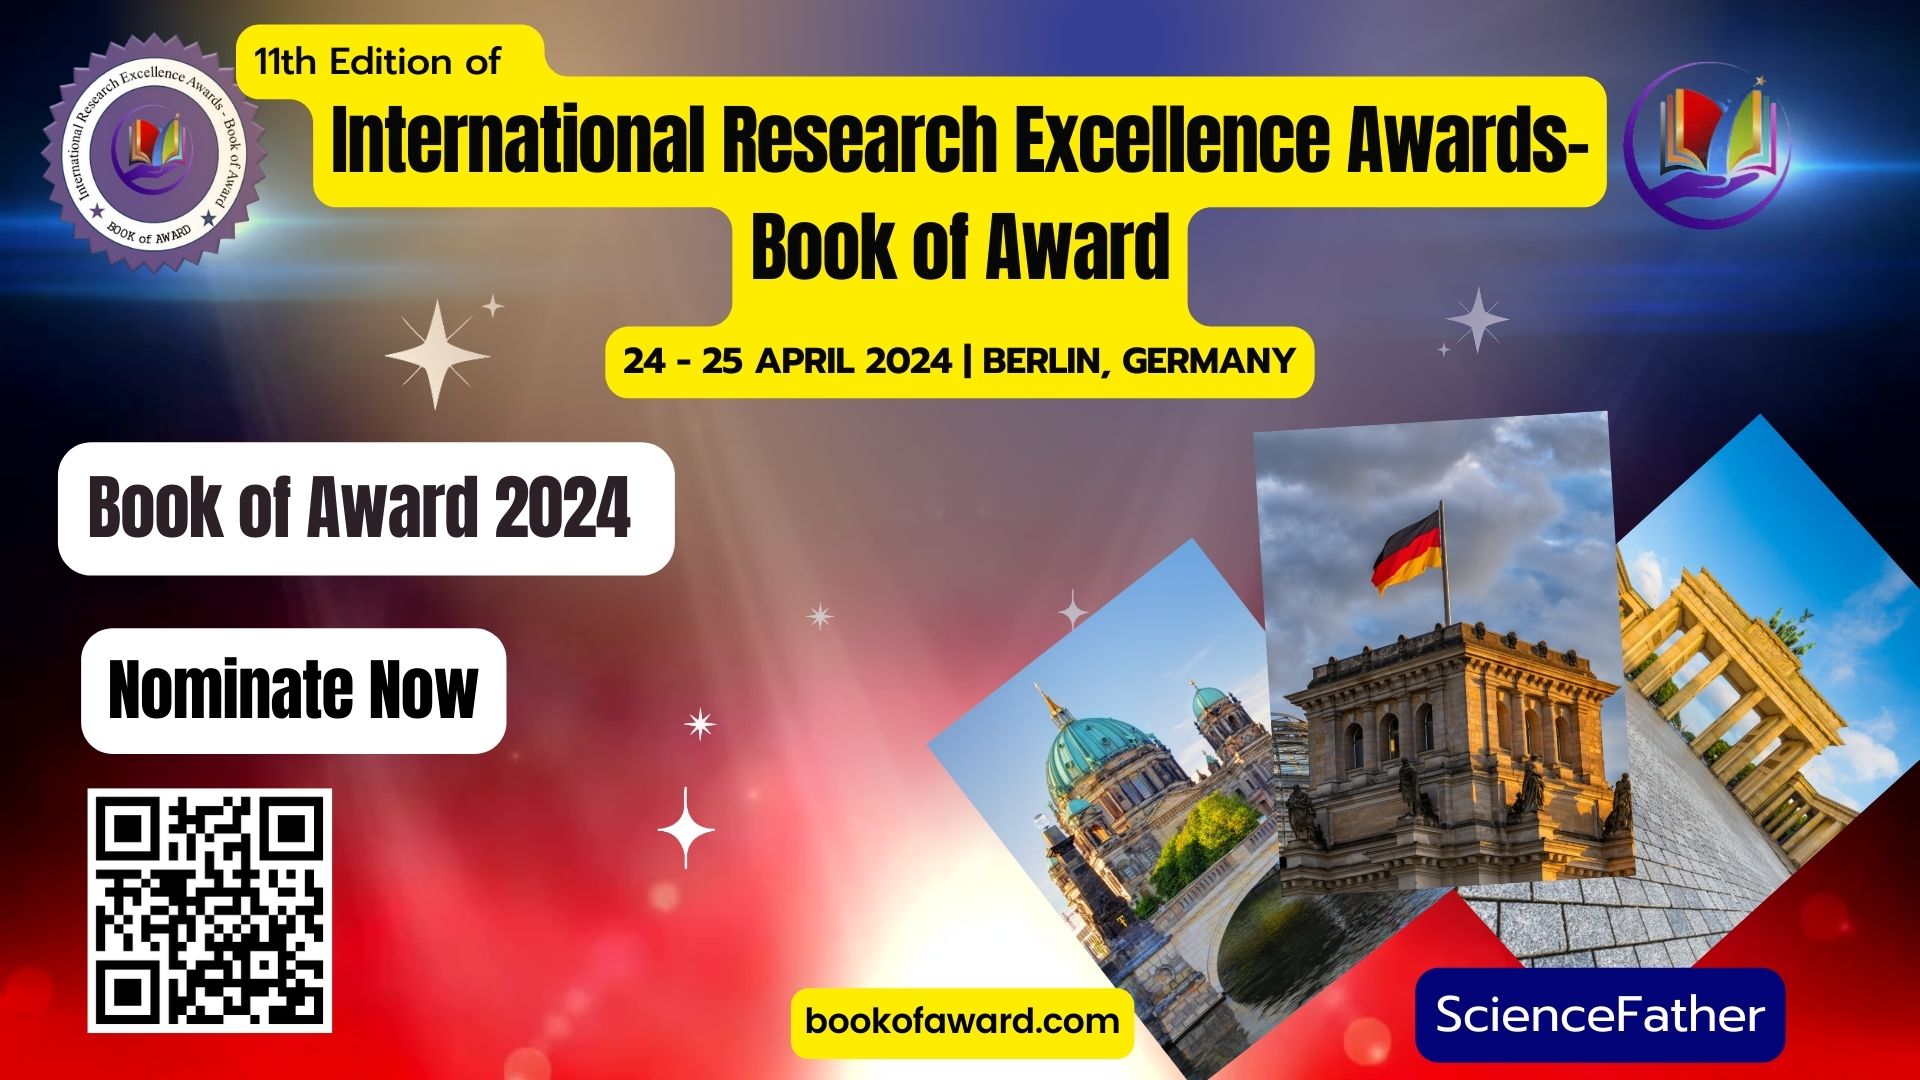 International Research Excellence Awards-Book of Award, Online Event